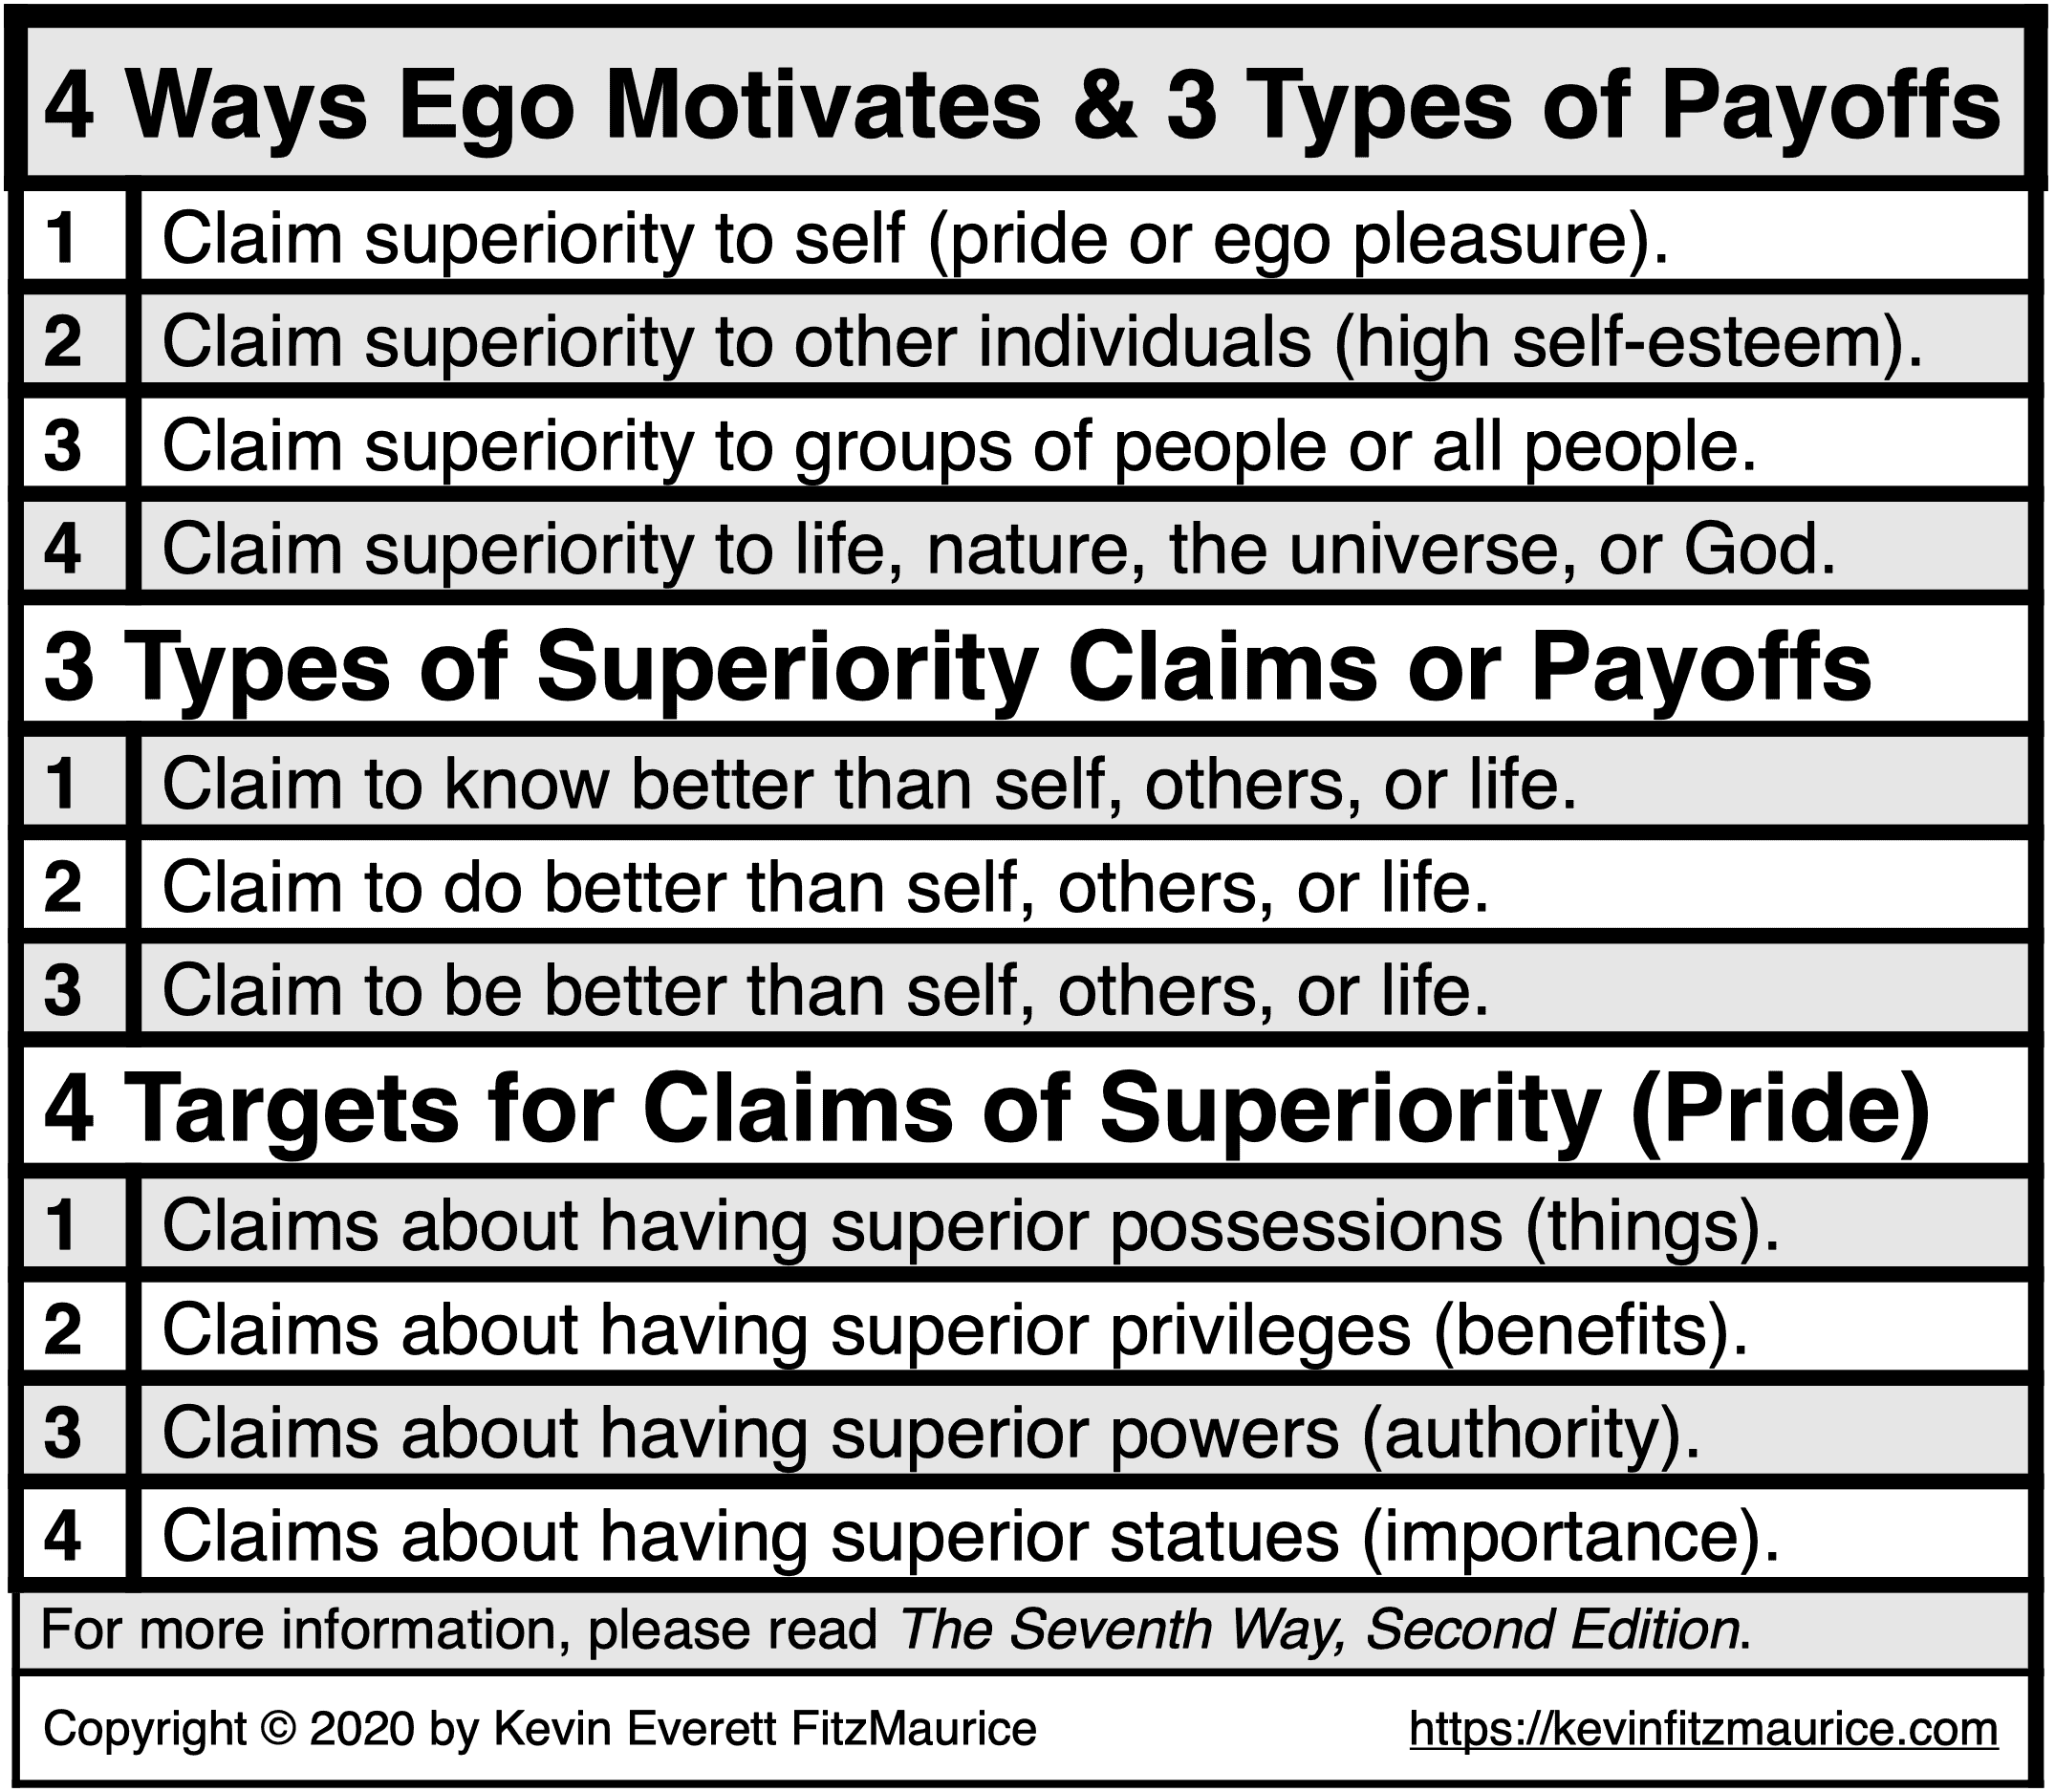 4 Ways Ego Motivated & 3 Types of Payoffs